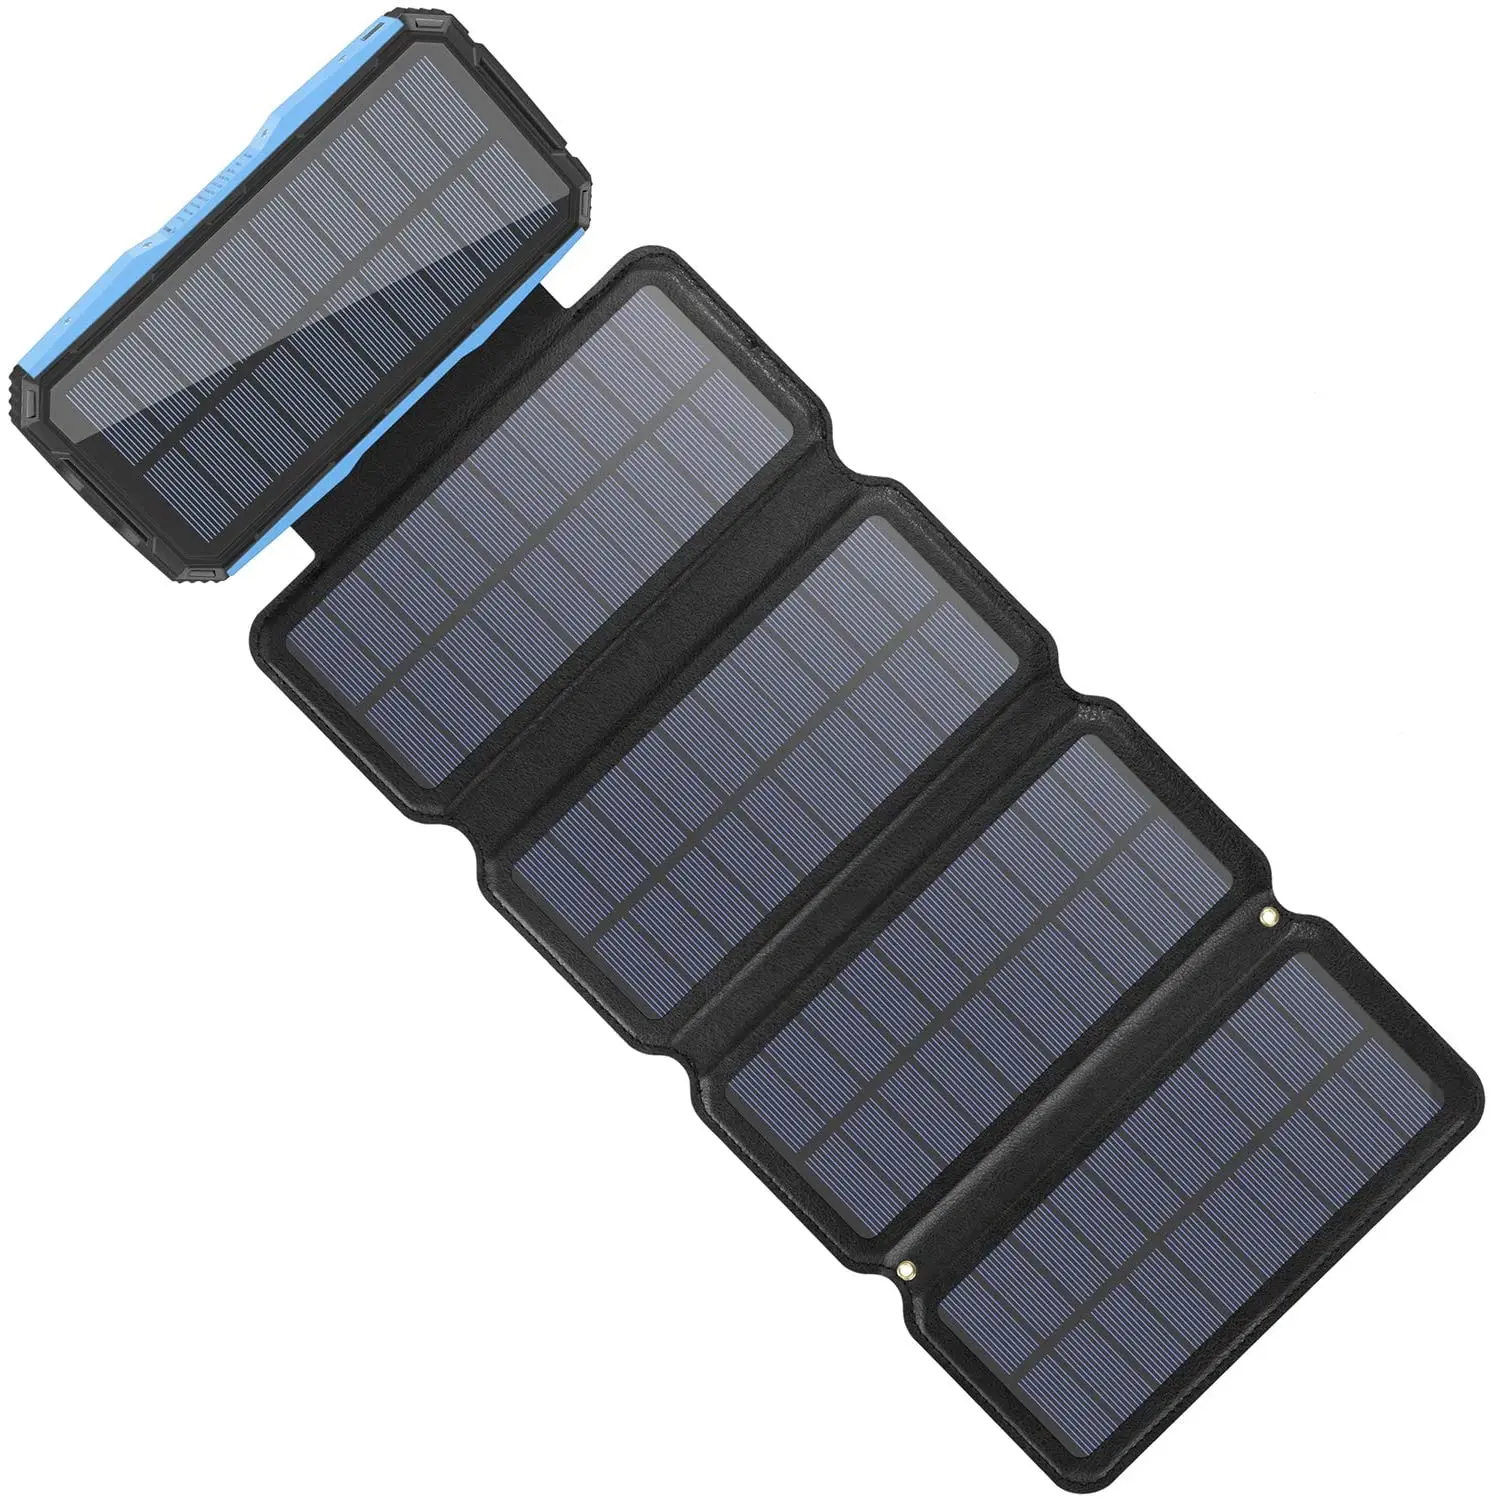 

Solar Charger 26800mAh PD Portable Power Bank 5 Panels 7.5W High Efficiency With Ultra Bright 60-LED Panel Light and Flashlight